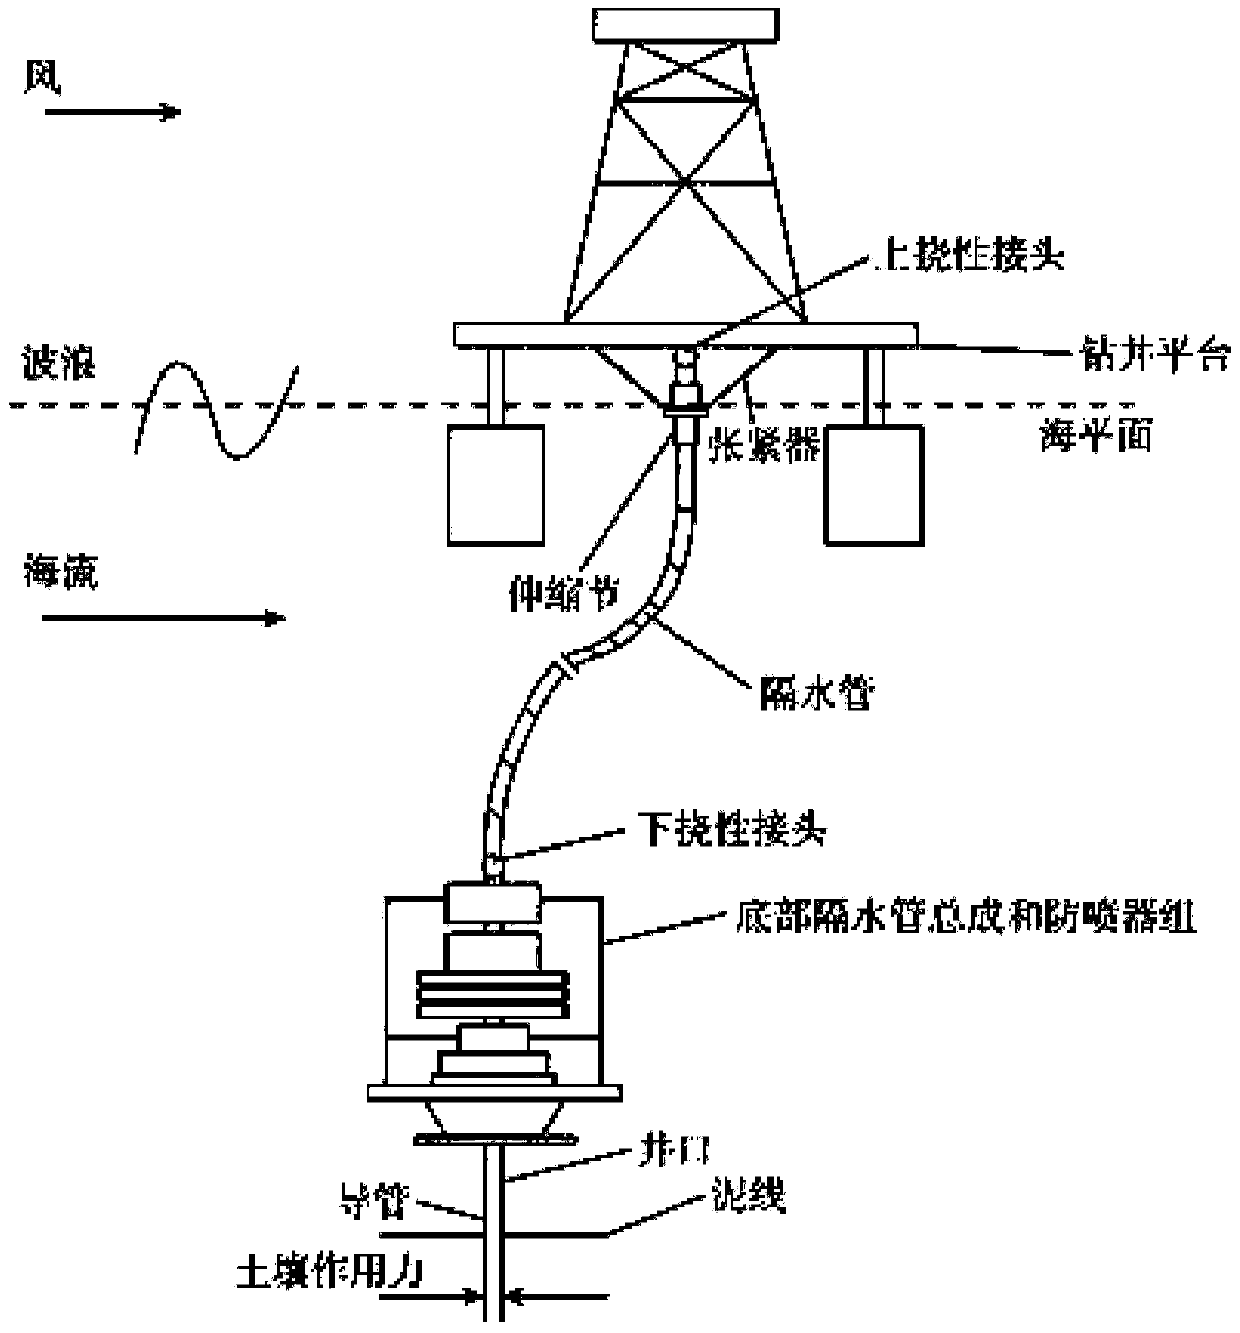 A method for determining the start-up timing of deepwater drilling riser emergency release